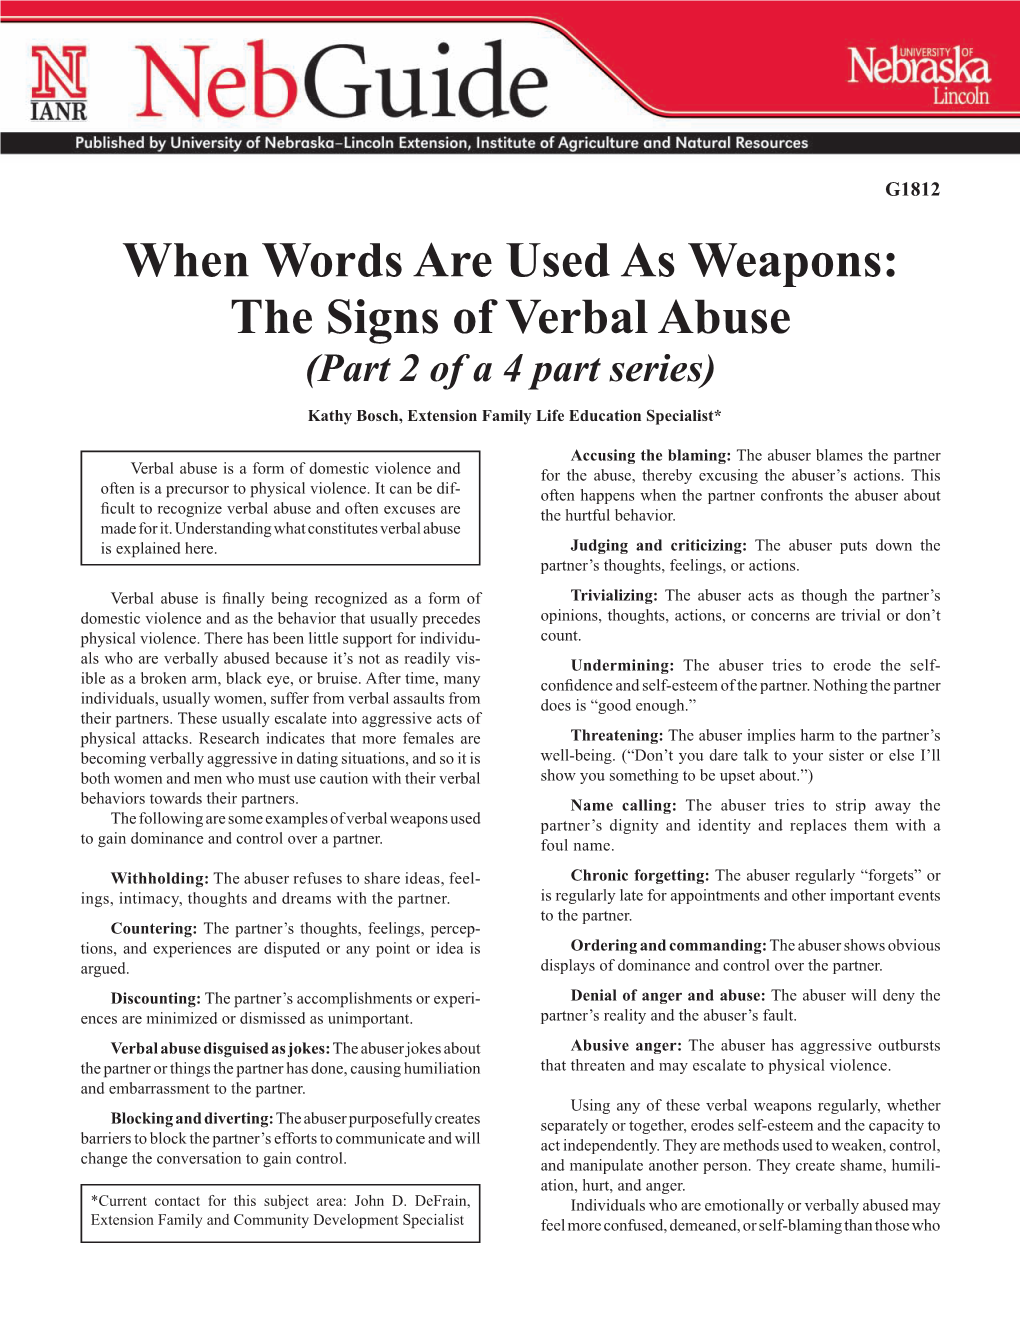 The Signs of Verbal Abuse (Part 2 of a 4 Part Series) Kathy Bosch, Extension Family Life Education Specialist*